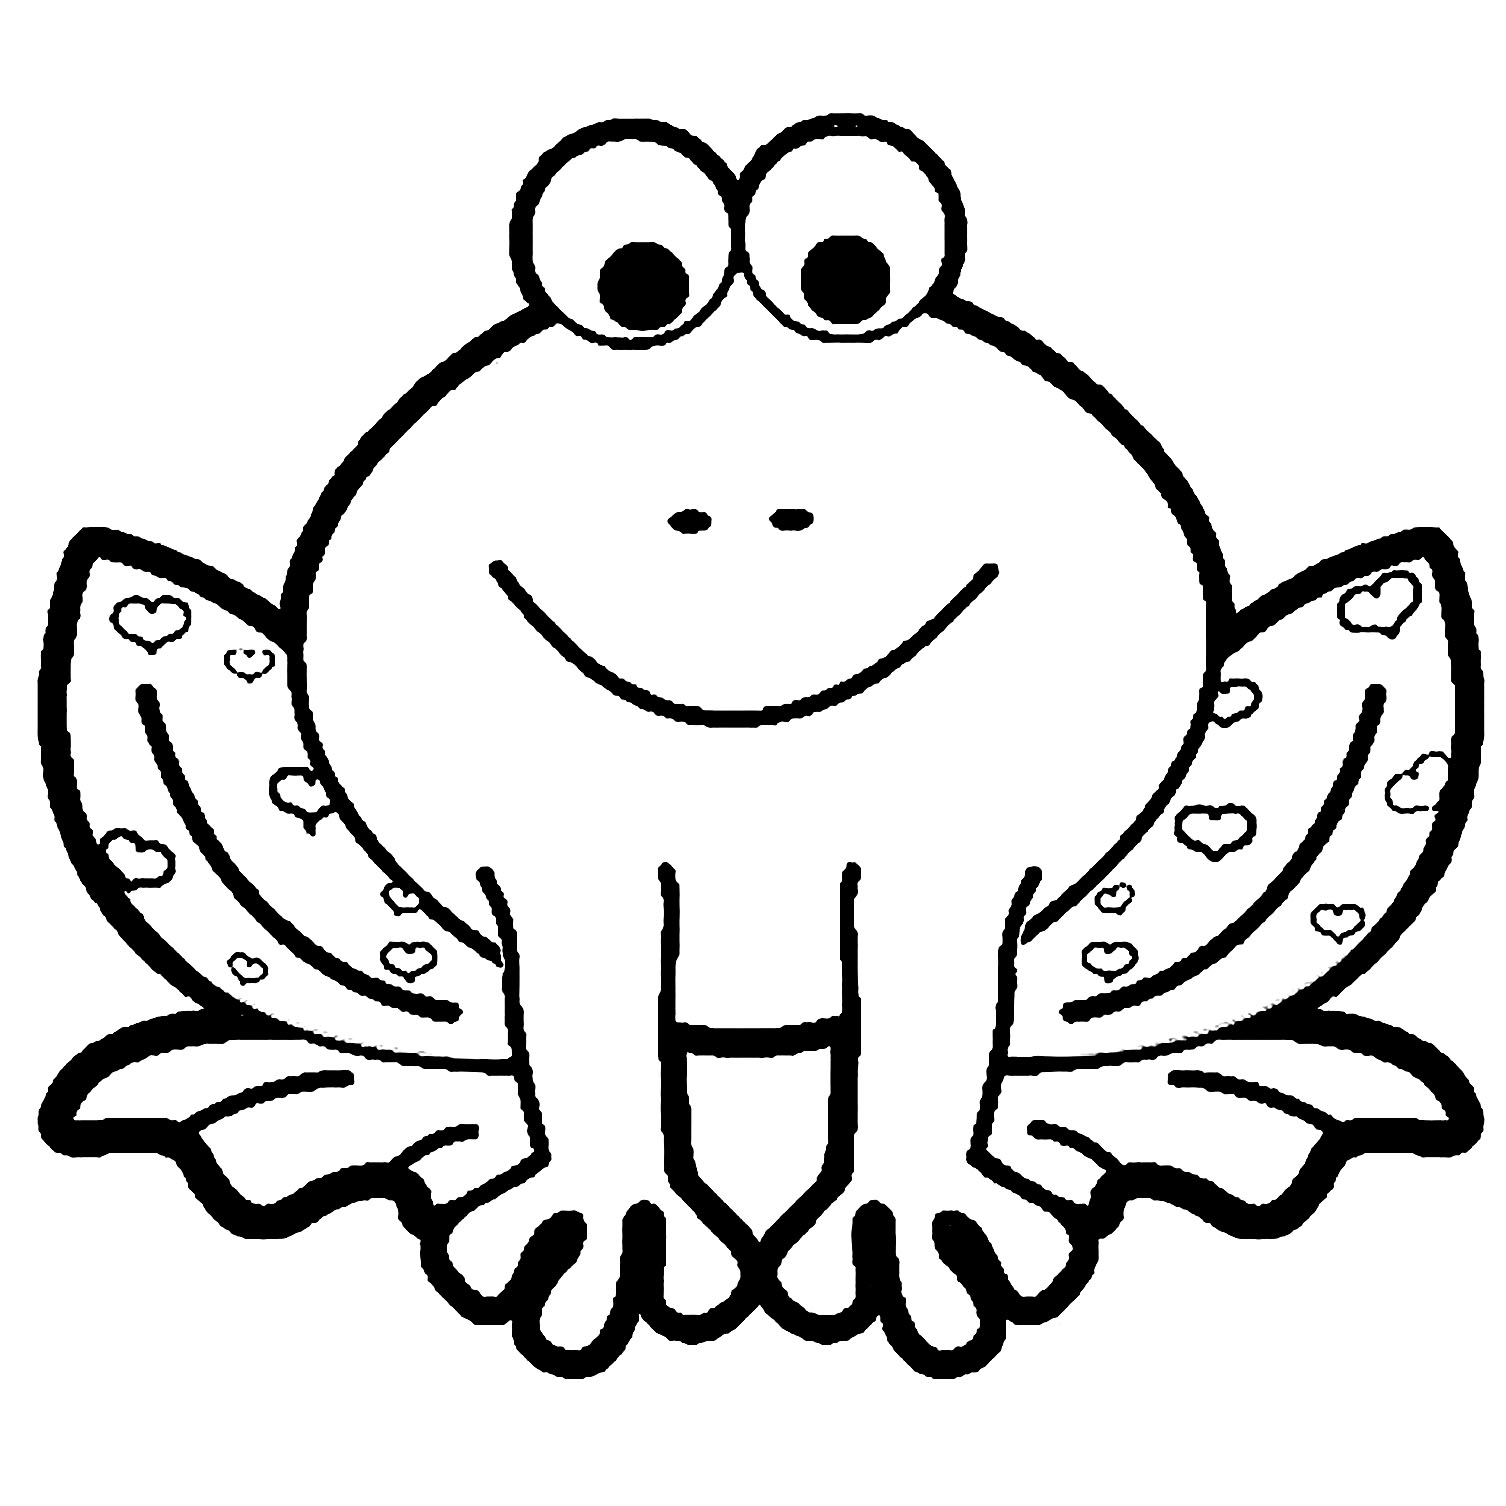 Download Frogs to color for kids - Frogs Kids Coloring Pages